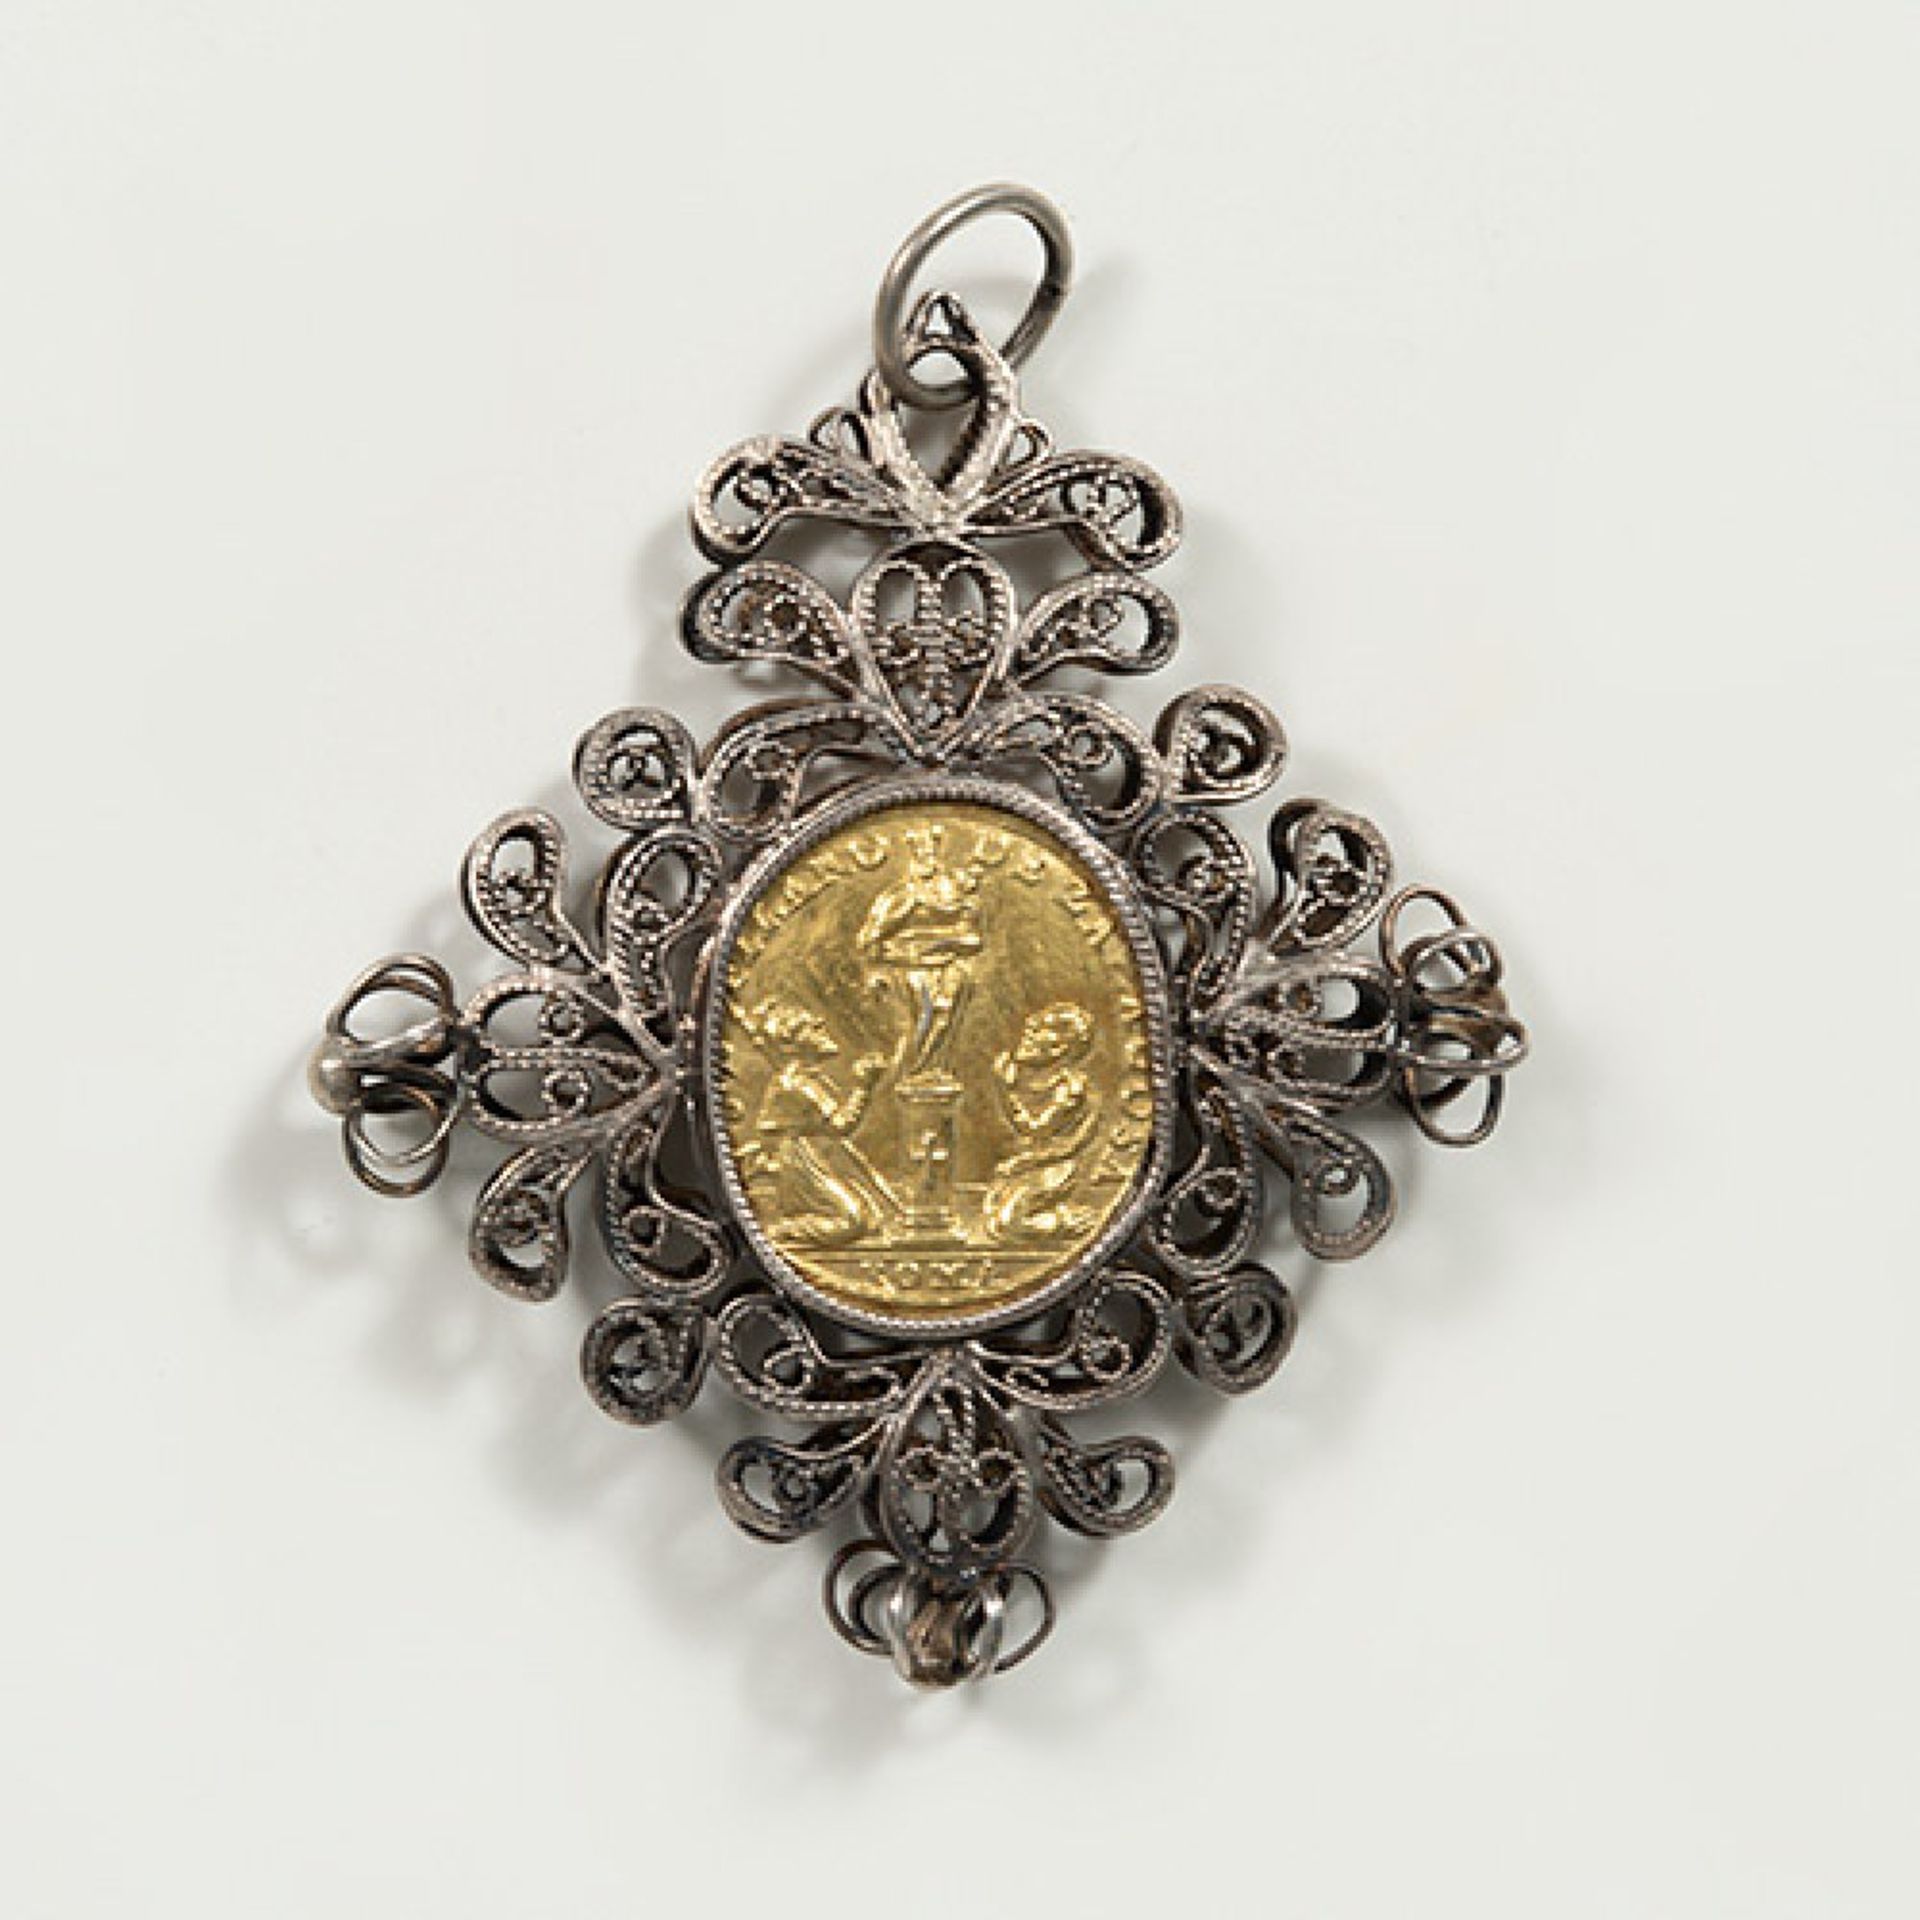 Medal type locket, XVIII century.In silver and gilded silver.Measurements: 6,7 x 5,5 cm.Reliquary